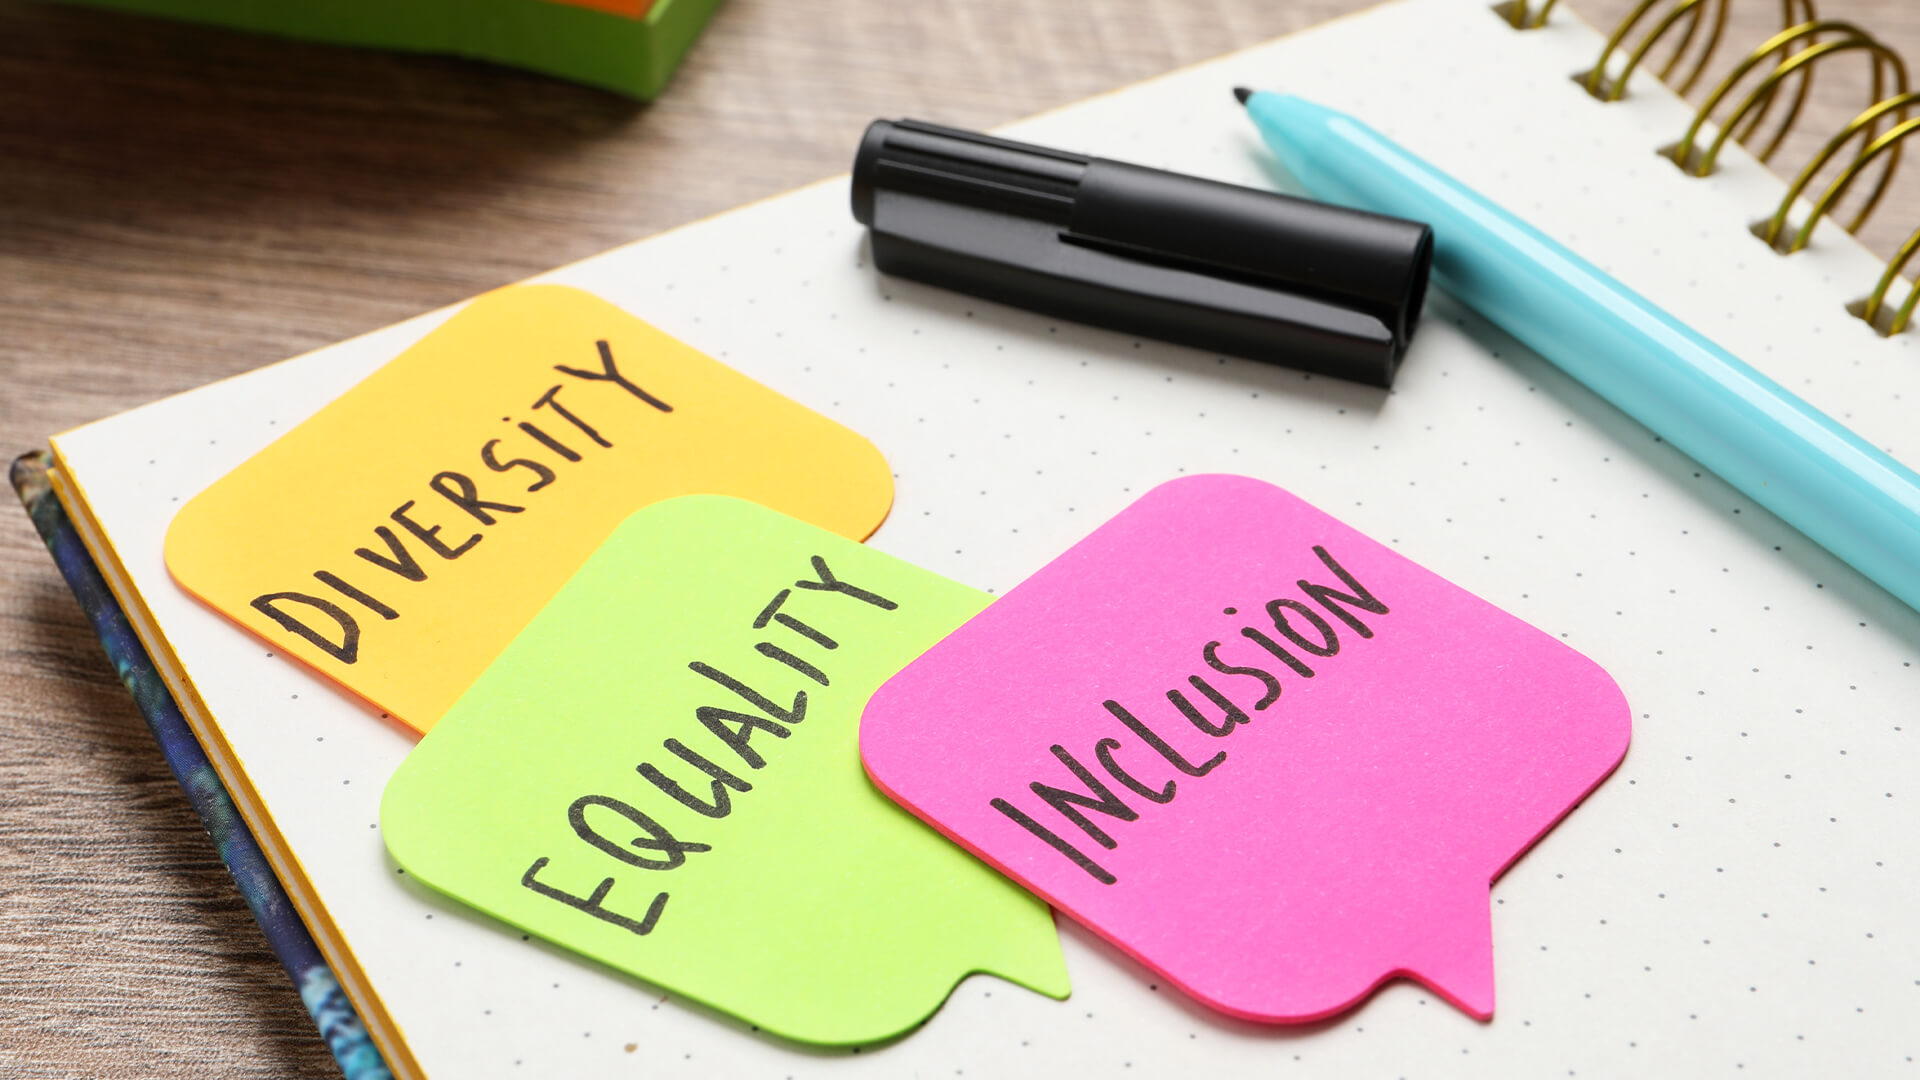 10 Reasons Why Focusing on Equality Is Crucial in 2023